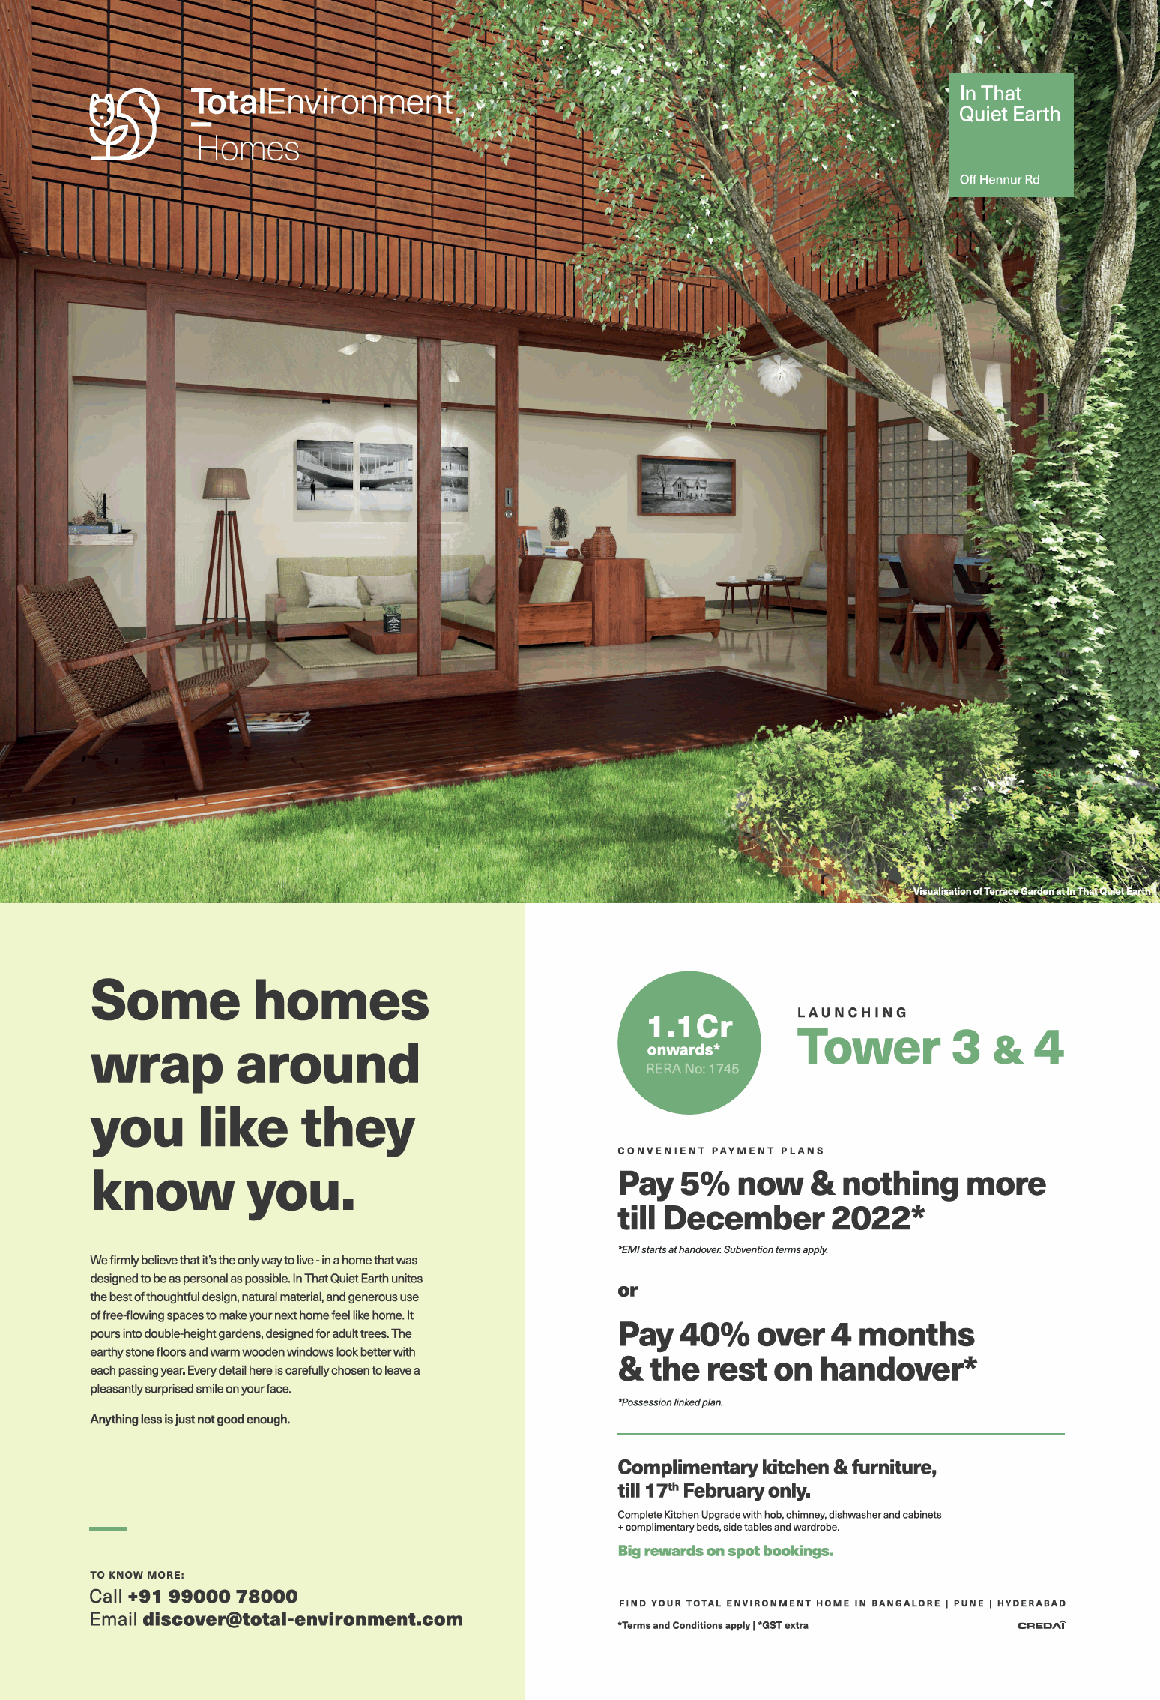 Total Environment Homes Launching Tower 3 And 4 1.1 Cr Ad - Advert Gallery